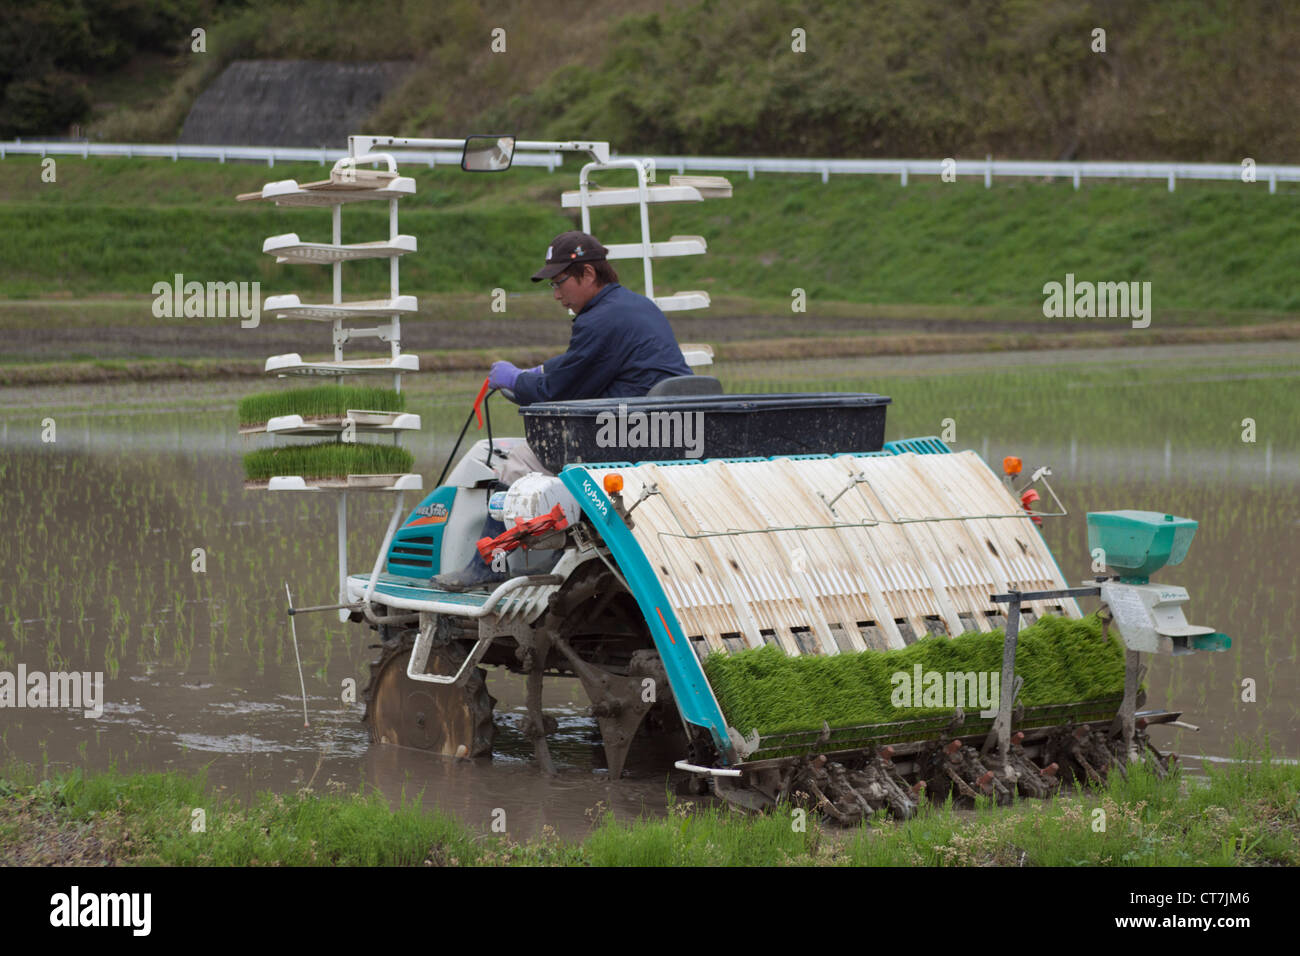 Rice planting machine common in rural Japanese agriculture. Stock Photo